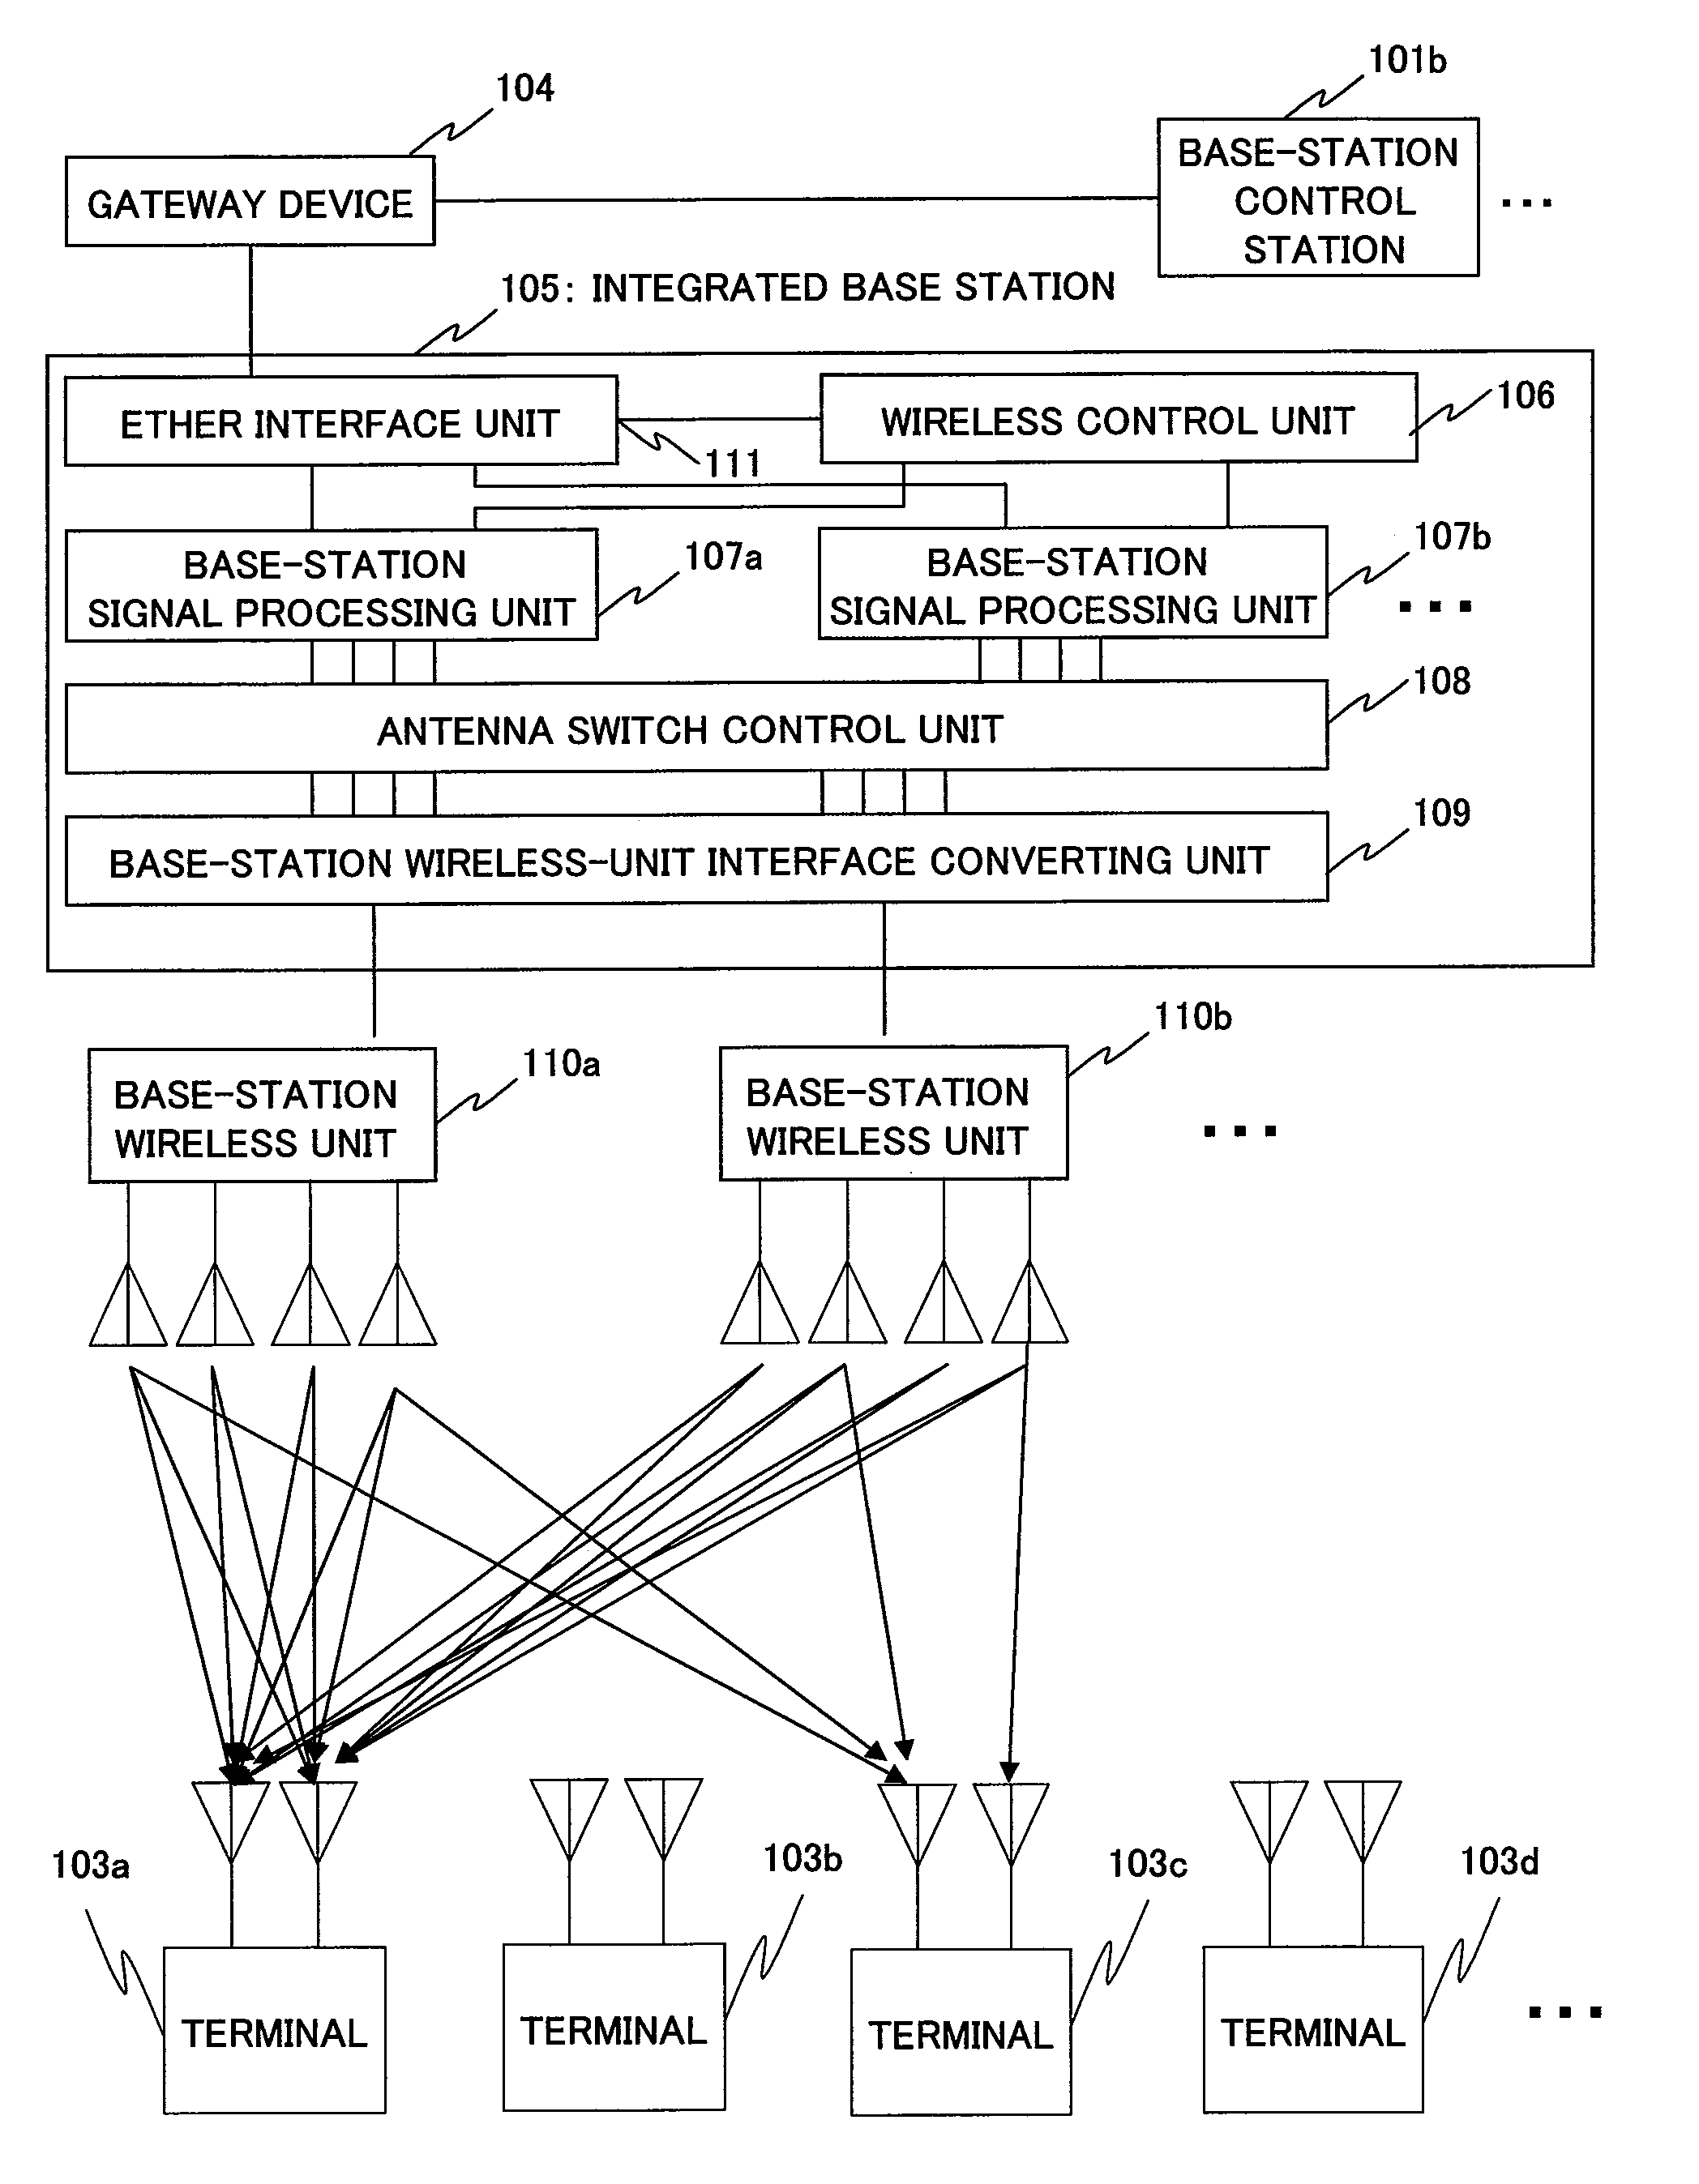 Wireless communication system, integrated base station, and terminal